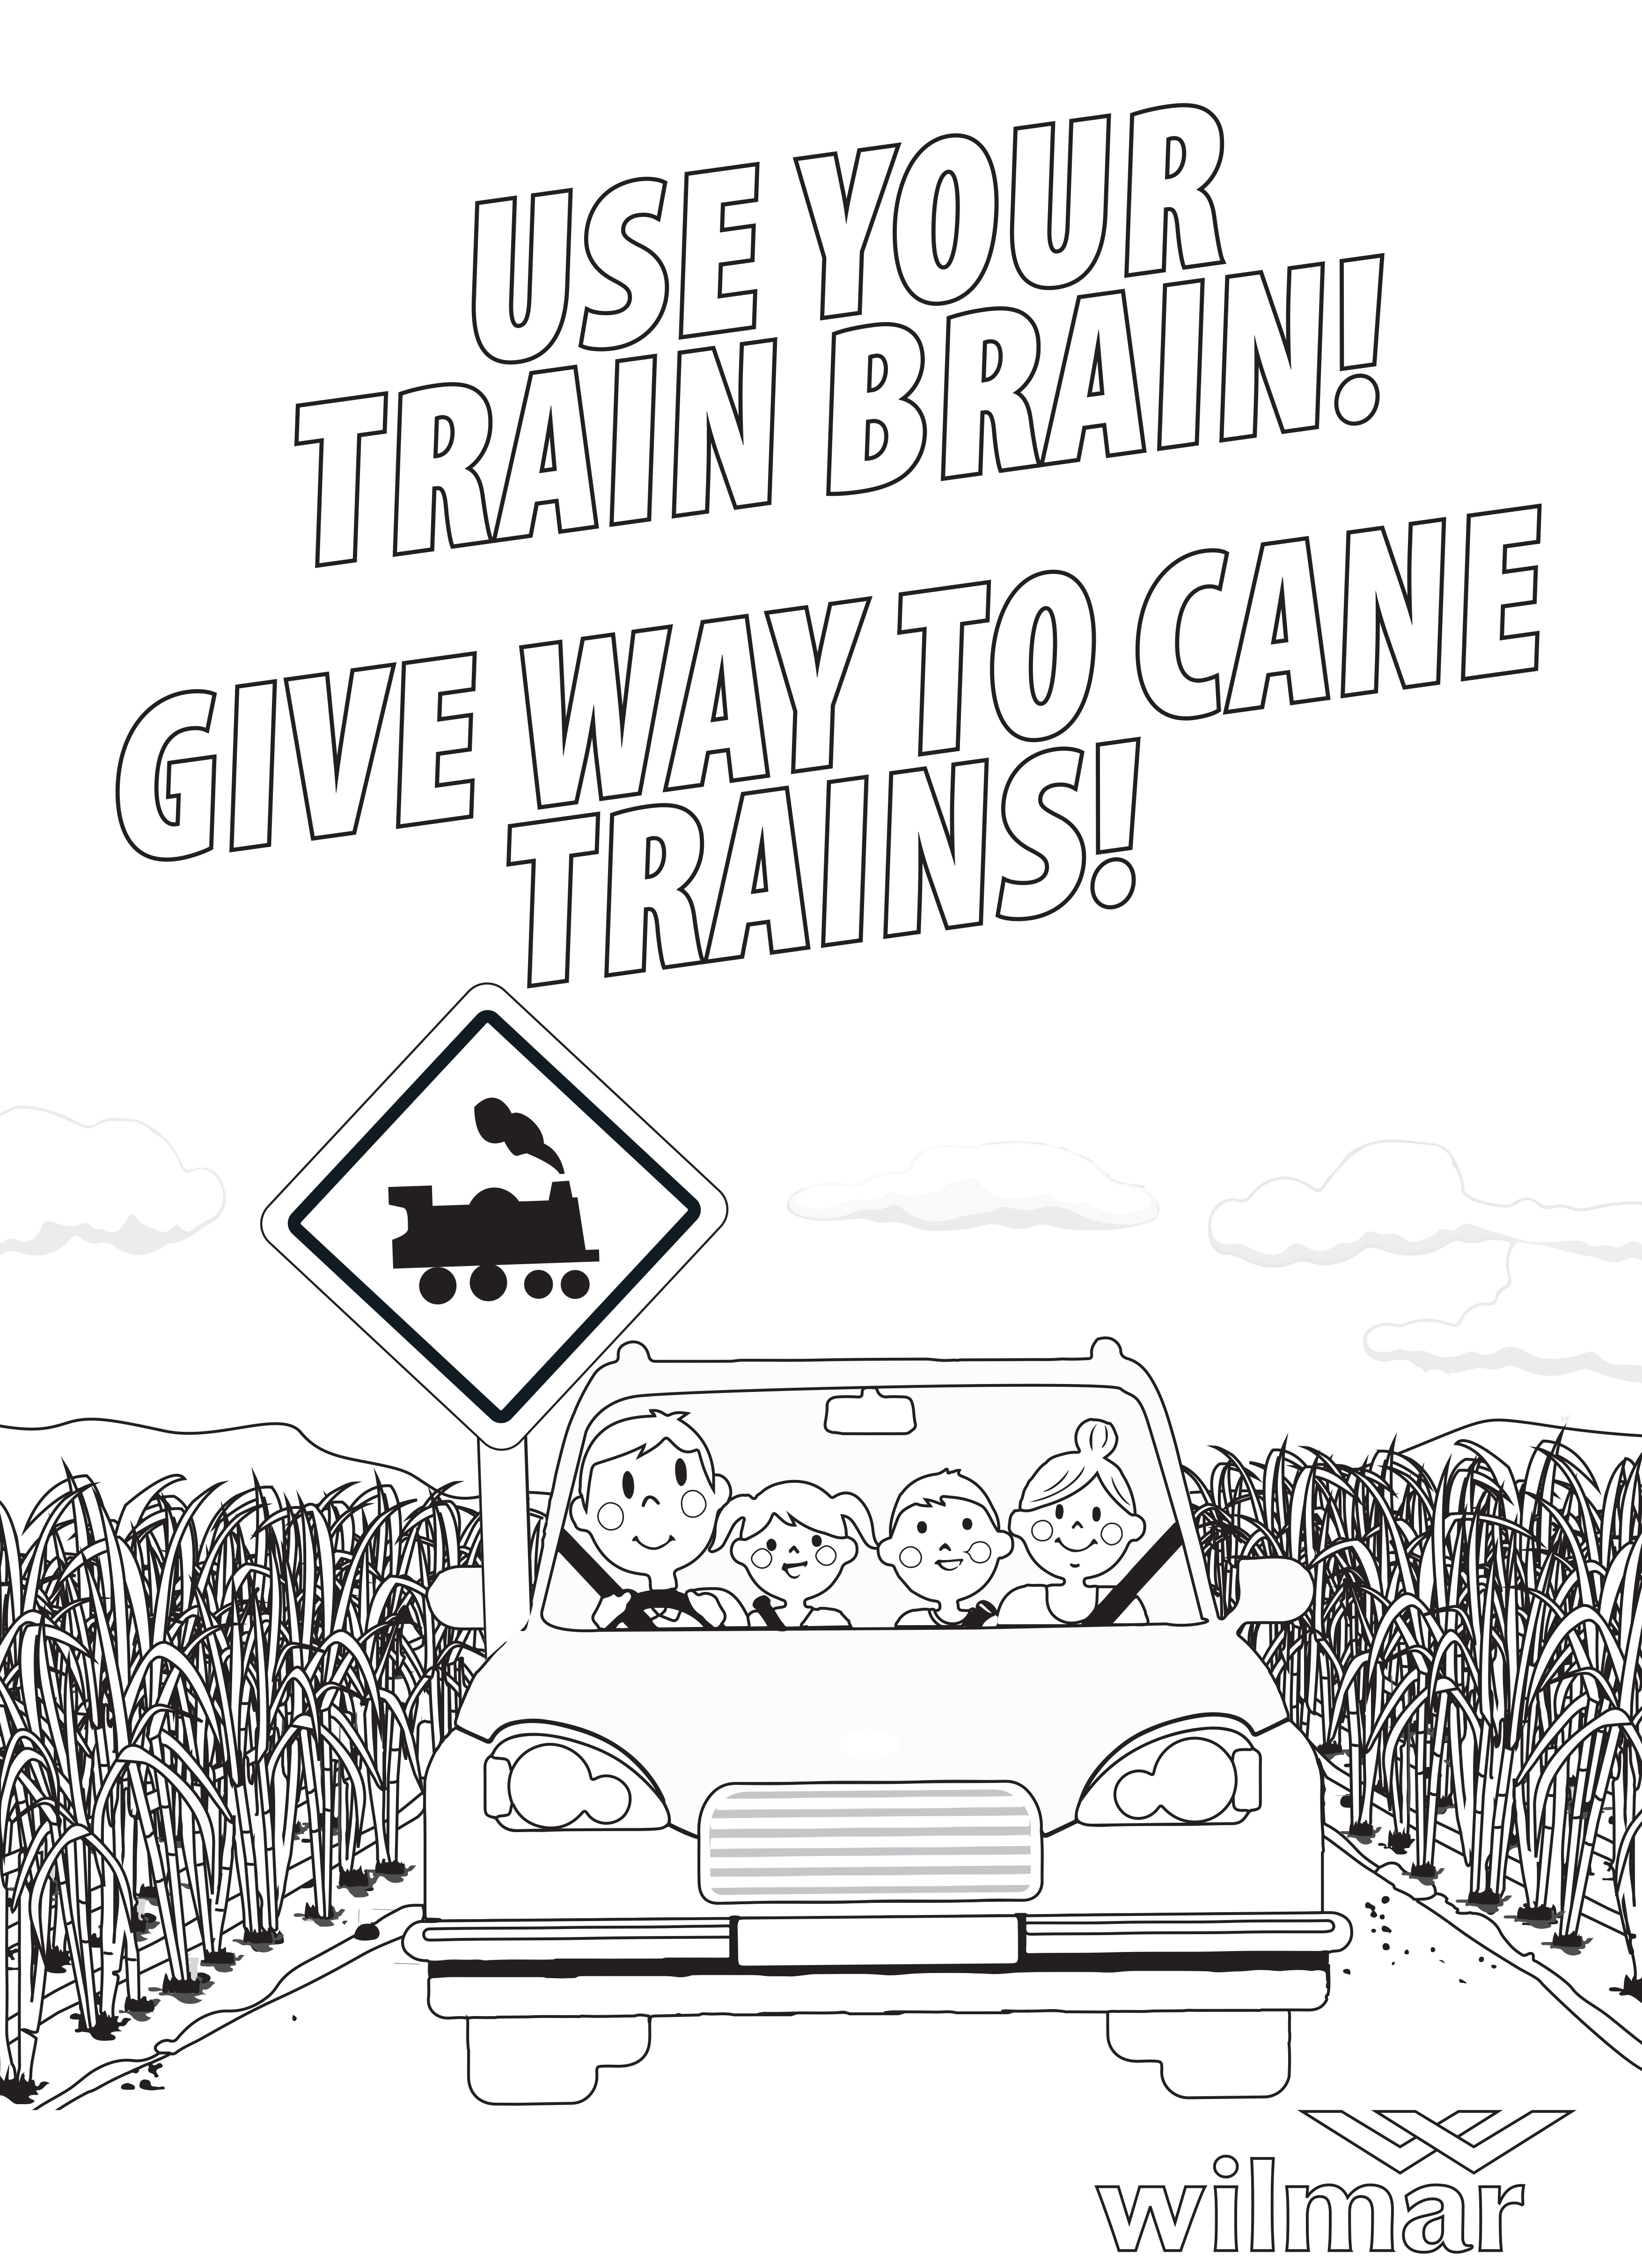 Use your train brain colouring in